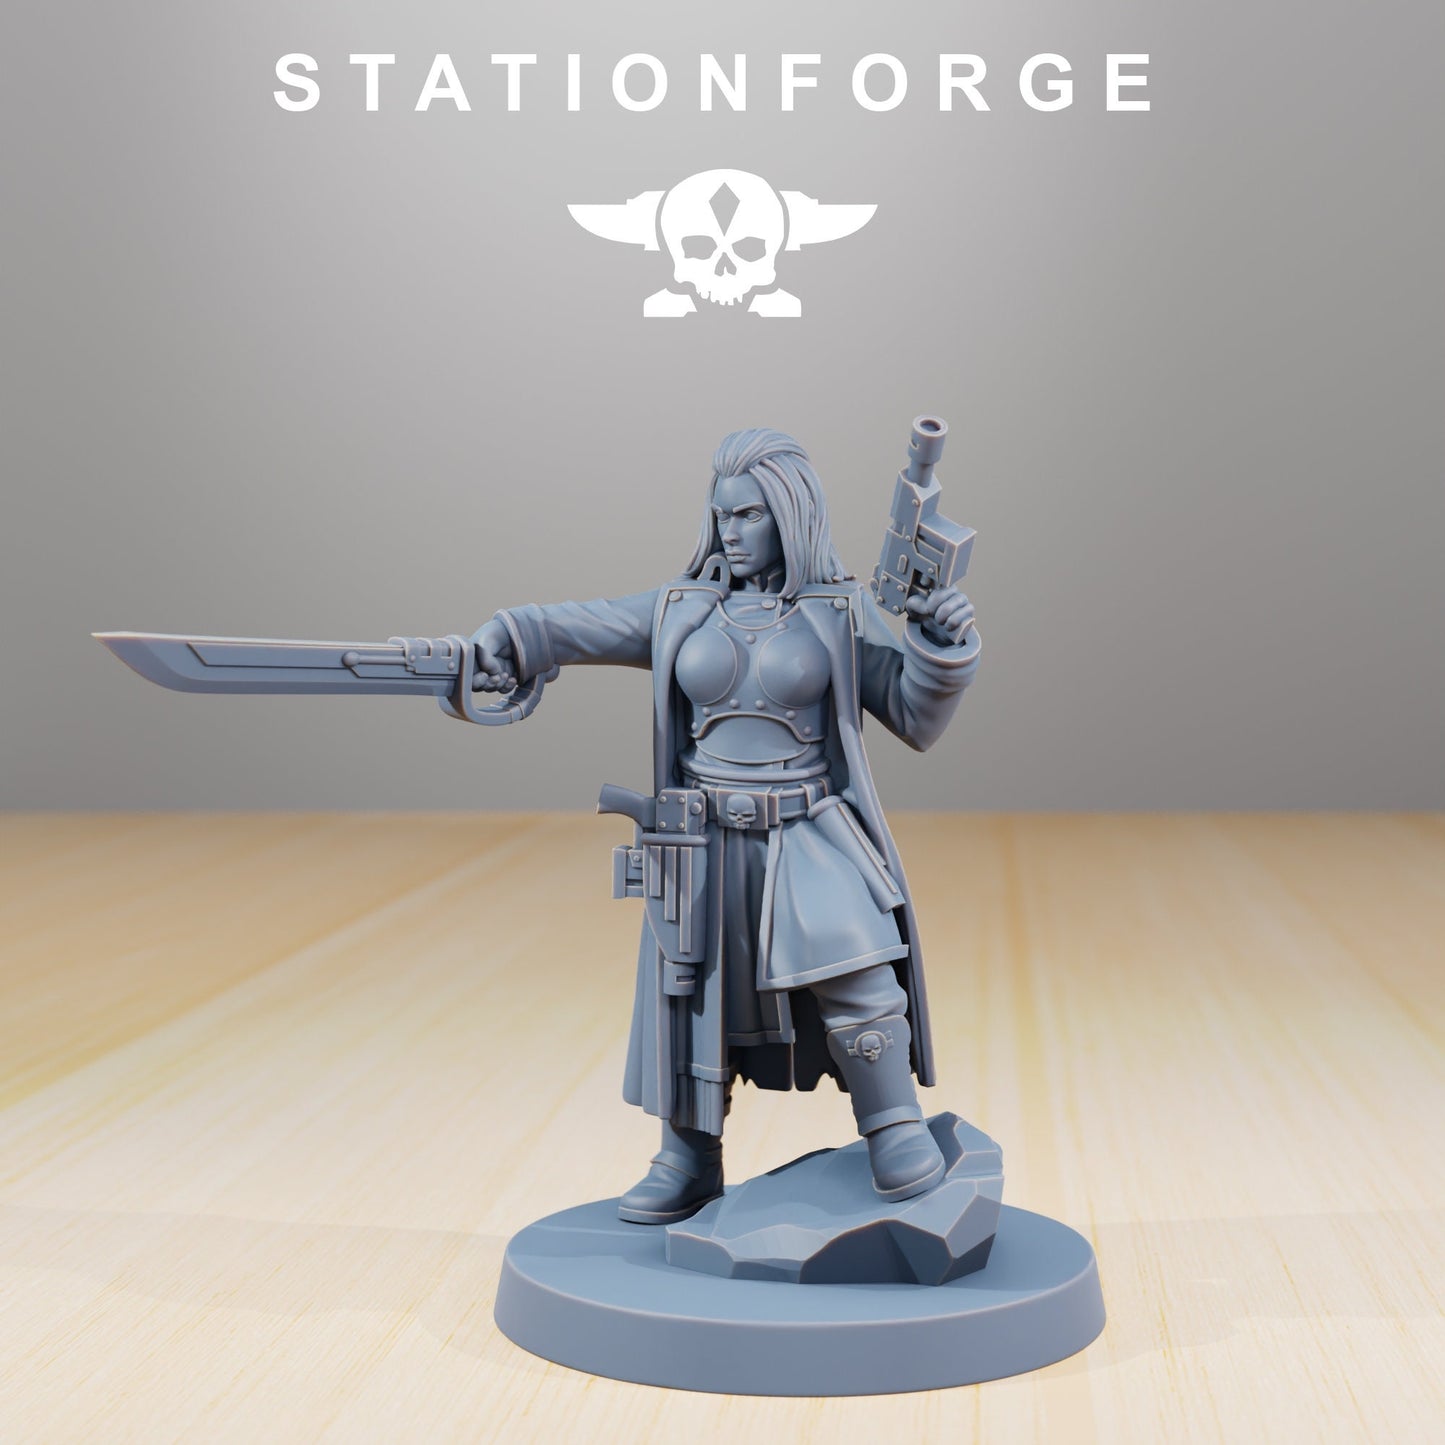 Grim Guard Duchess (sculpted by Stationforge)